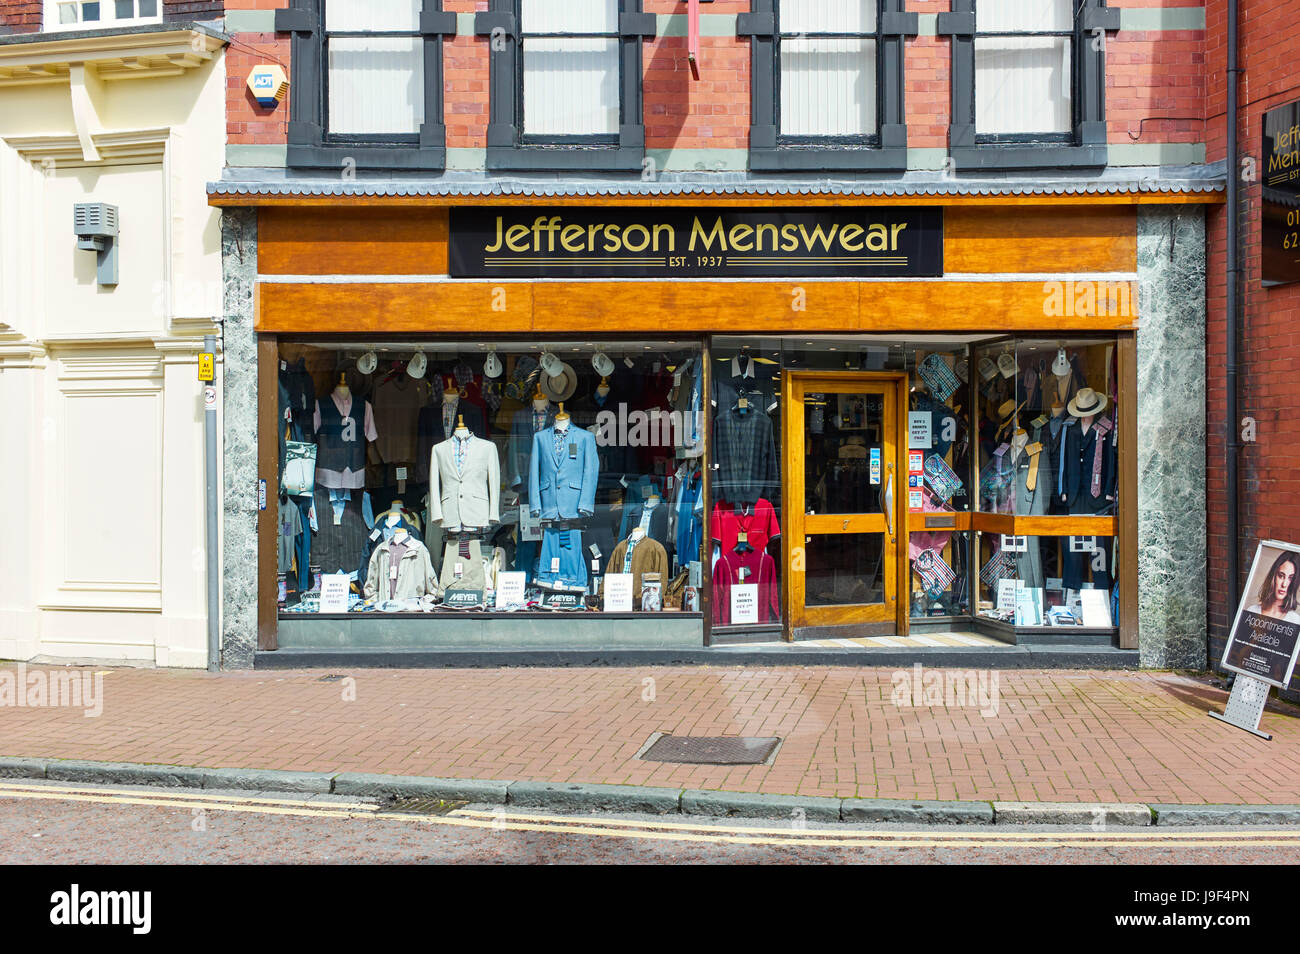 Traditional menswear shop in Nantwich, Cheshire Stock Photo